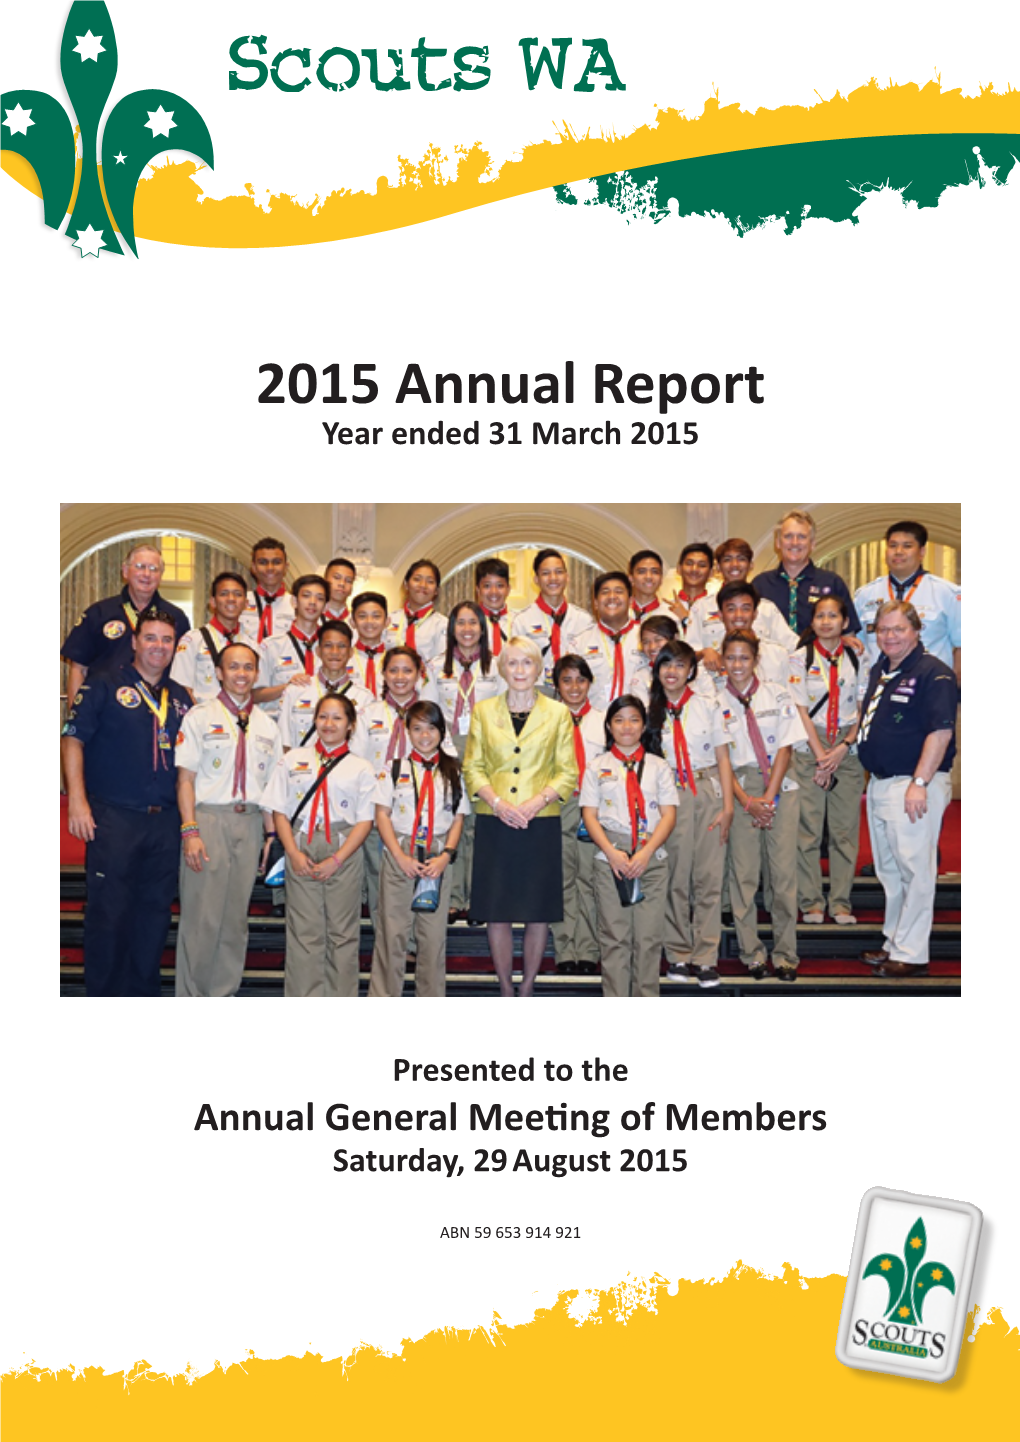 2015 Annual Report Year Ended 31 March 2015